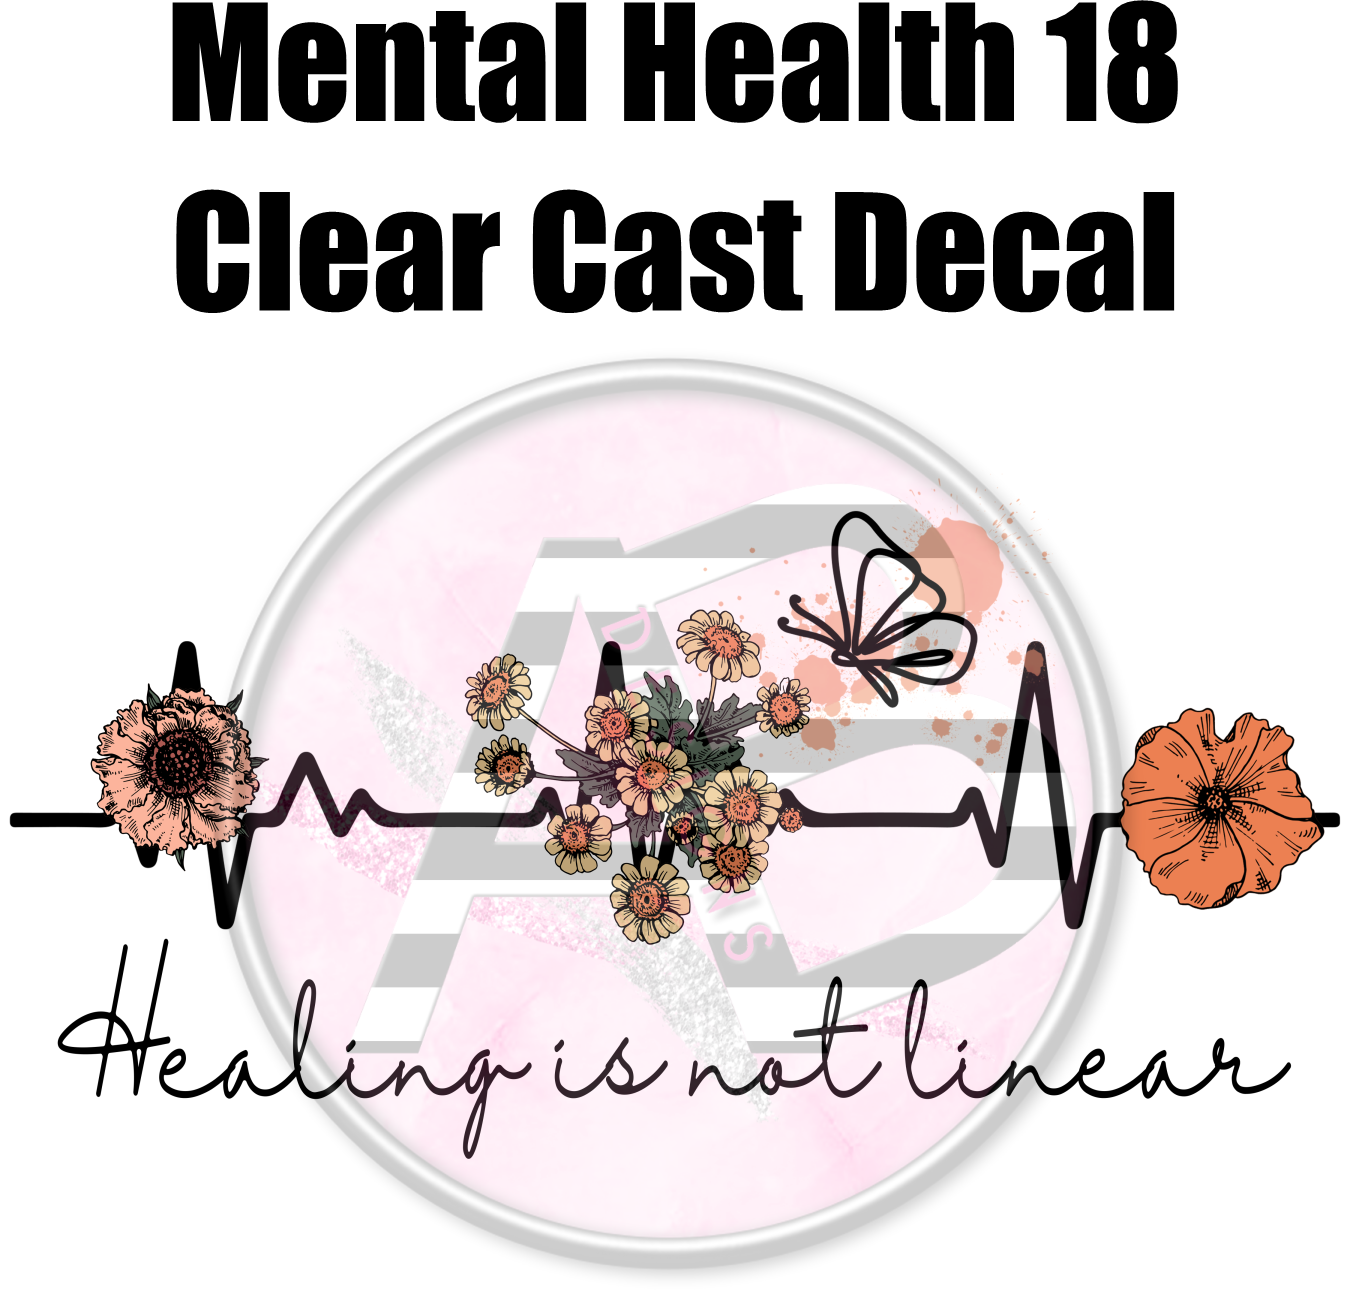 Mental Health 18 - Clear Cast Decal